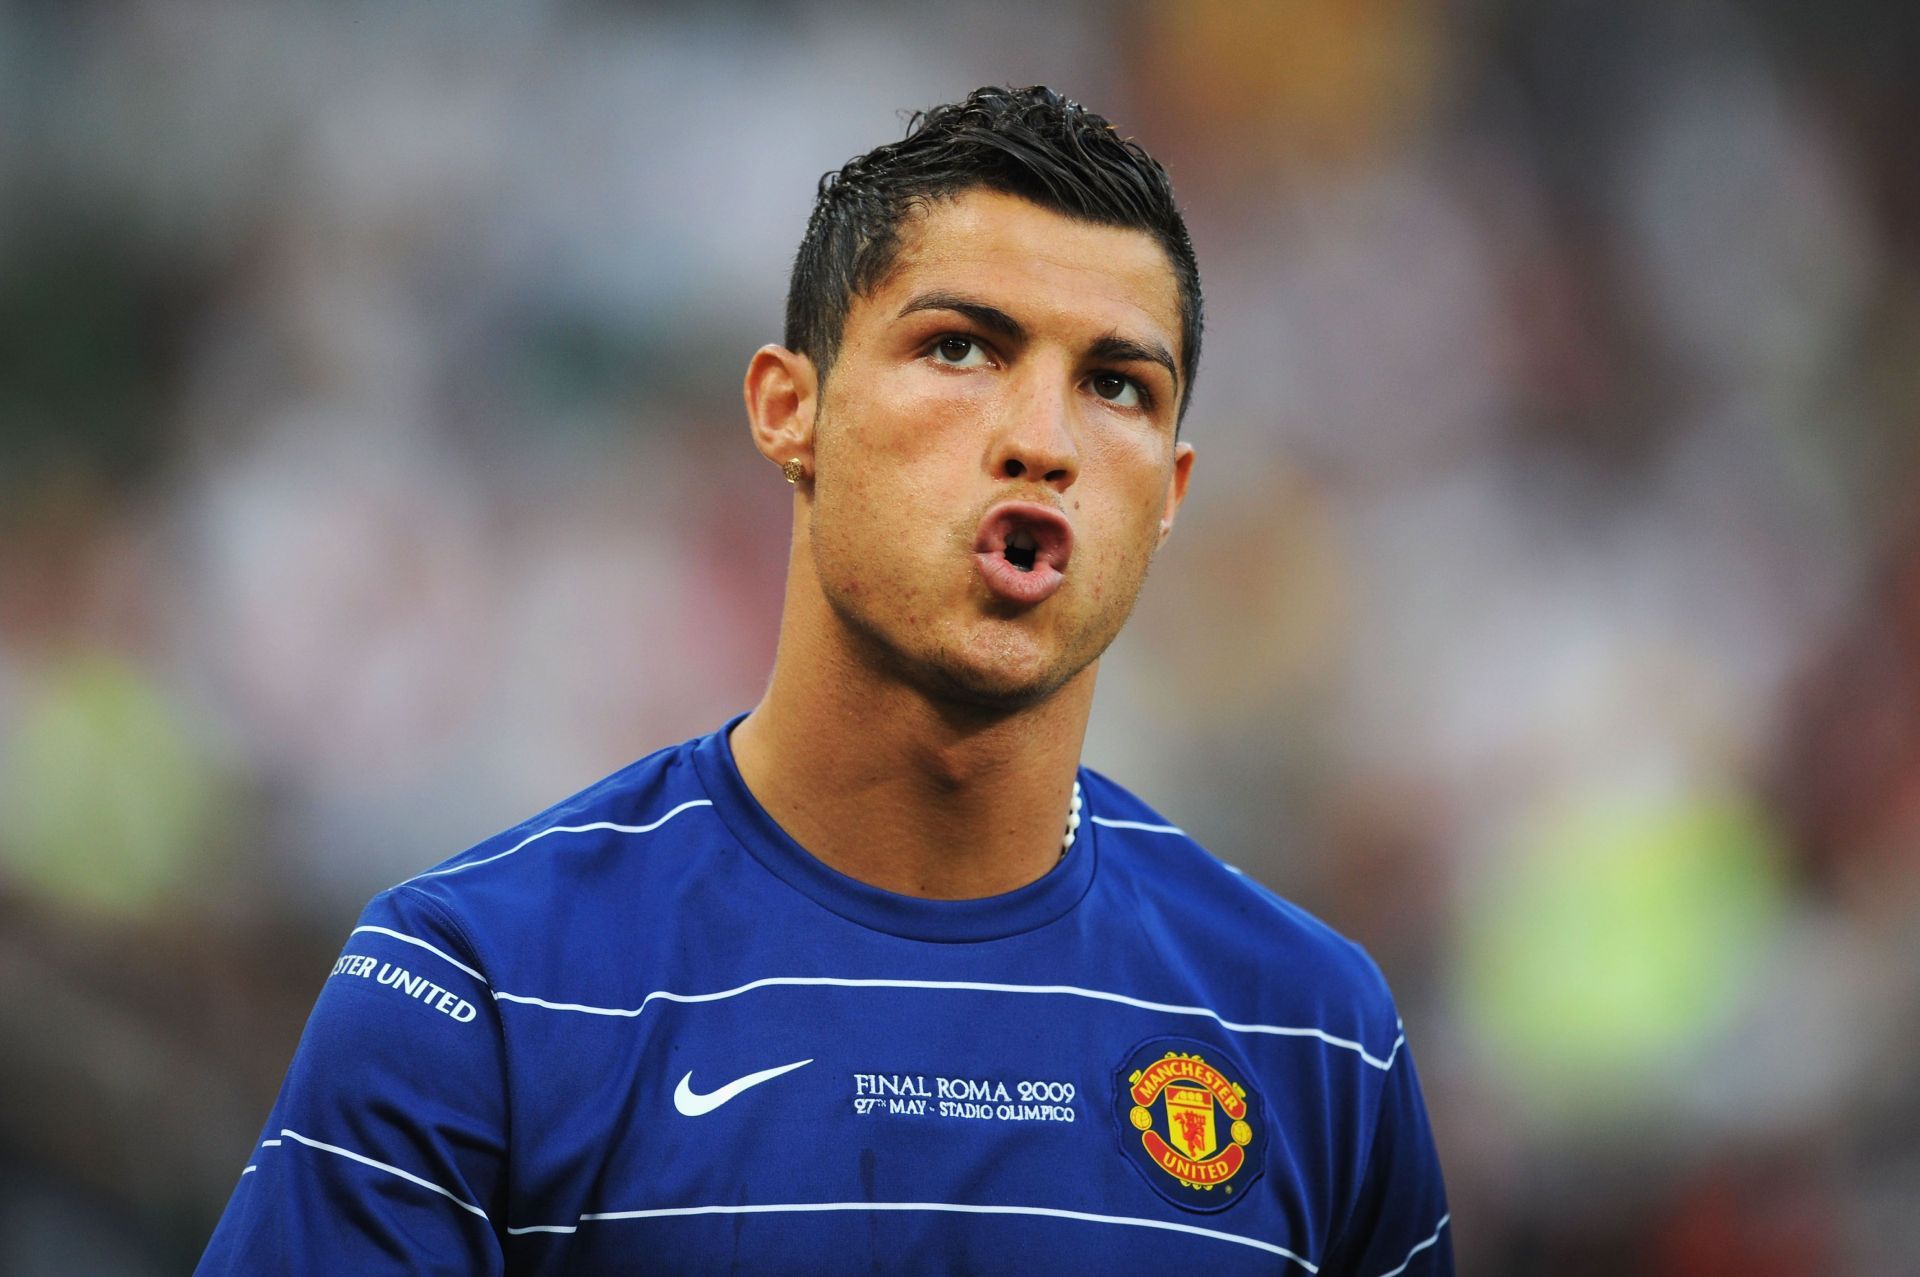 A return to the Portuguese league could be on the cards for Cristiano Ronaldo.